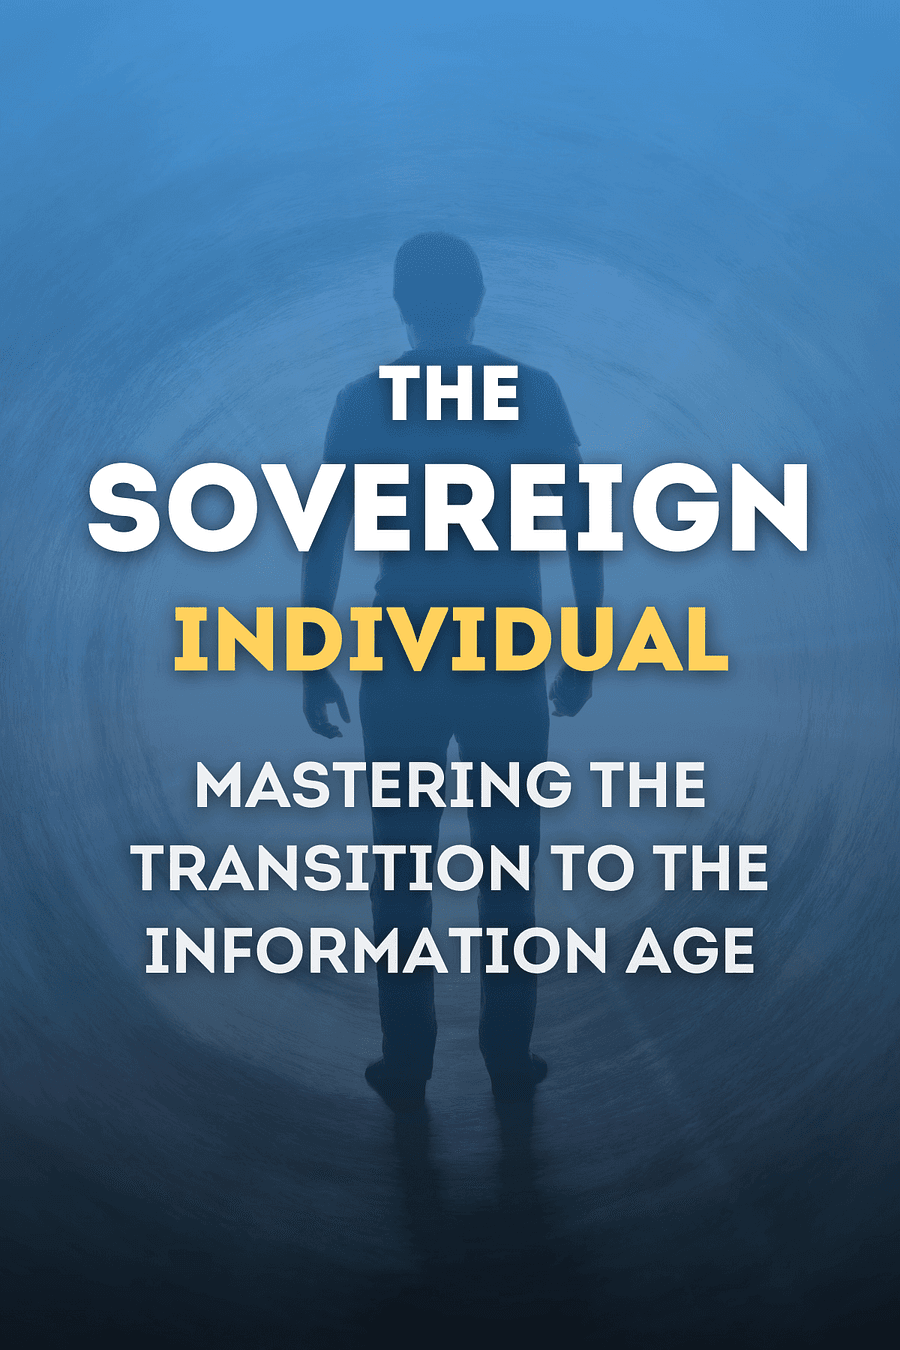 The Sovereign Individual by James Dale Davidson, Lord William Rees-Mogg - Book Summary